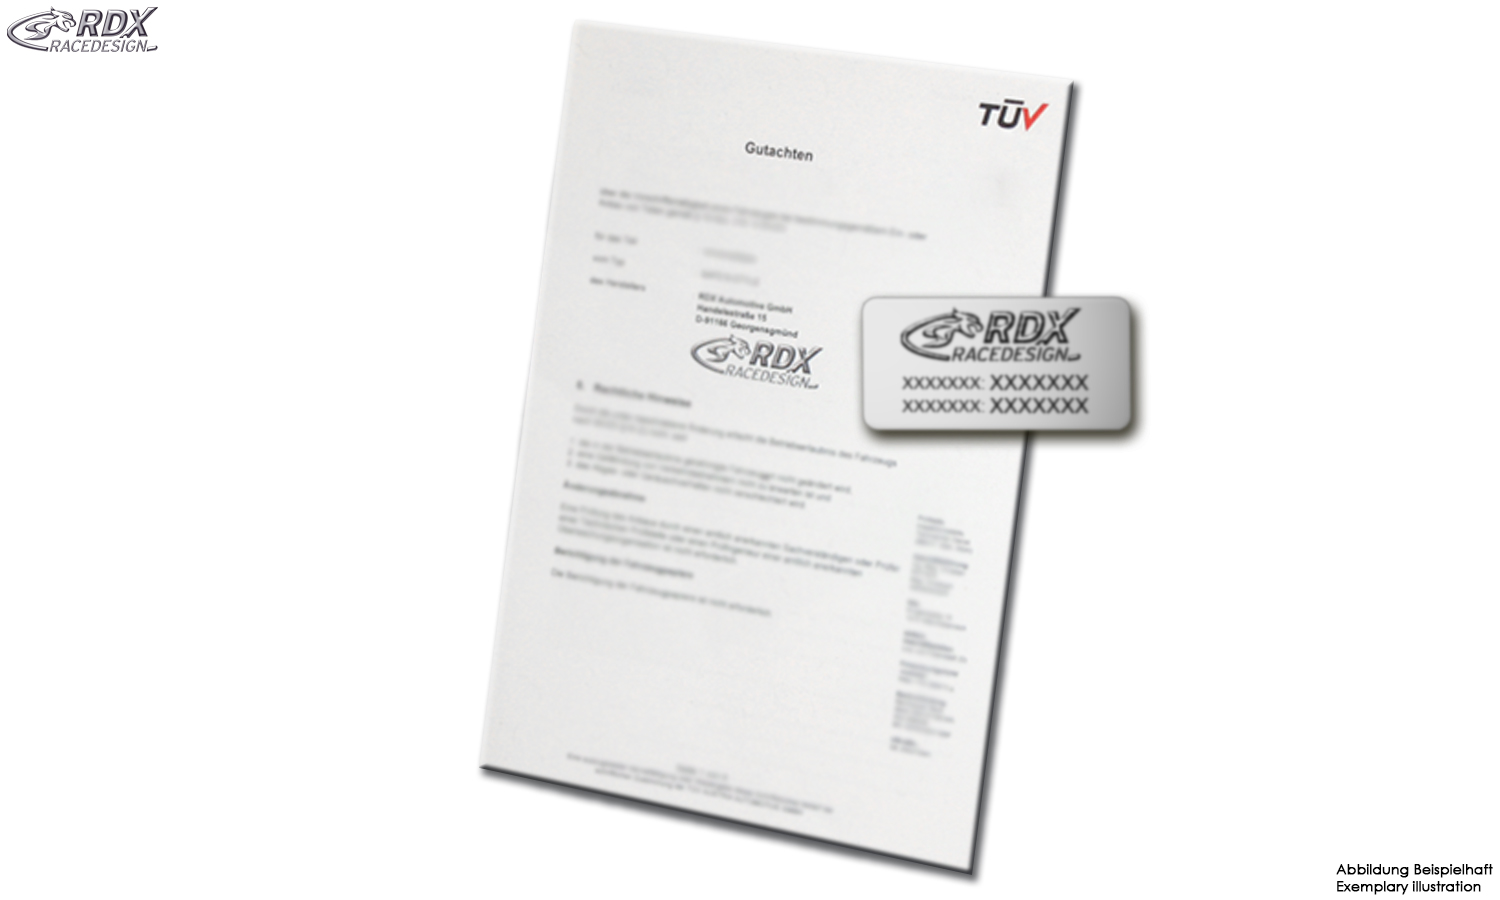 Approval & ID-Label for RDX Product: RDCL001